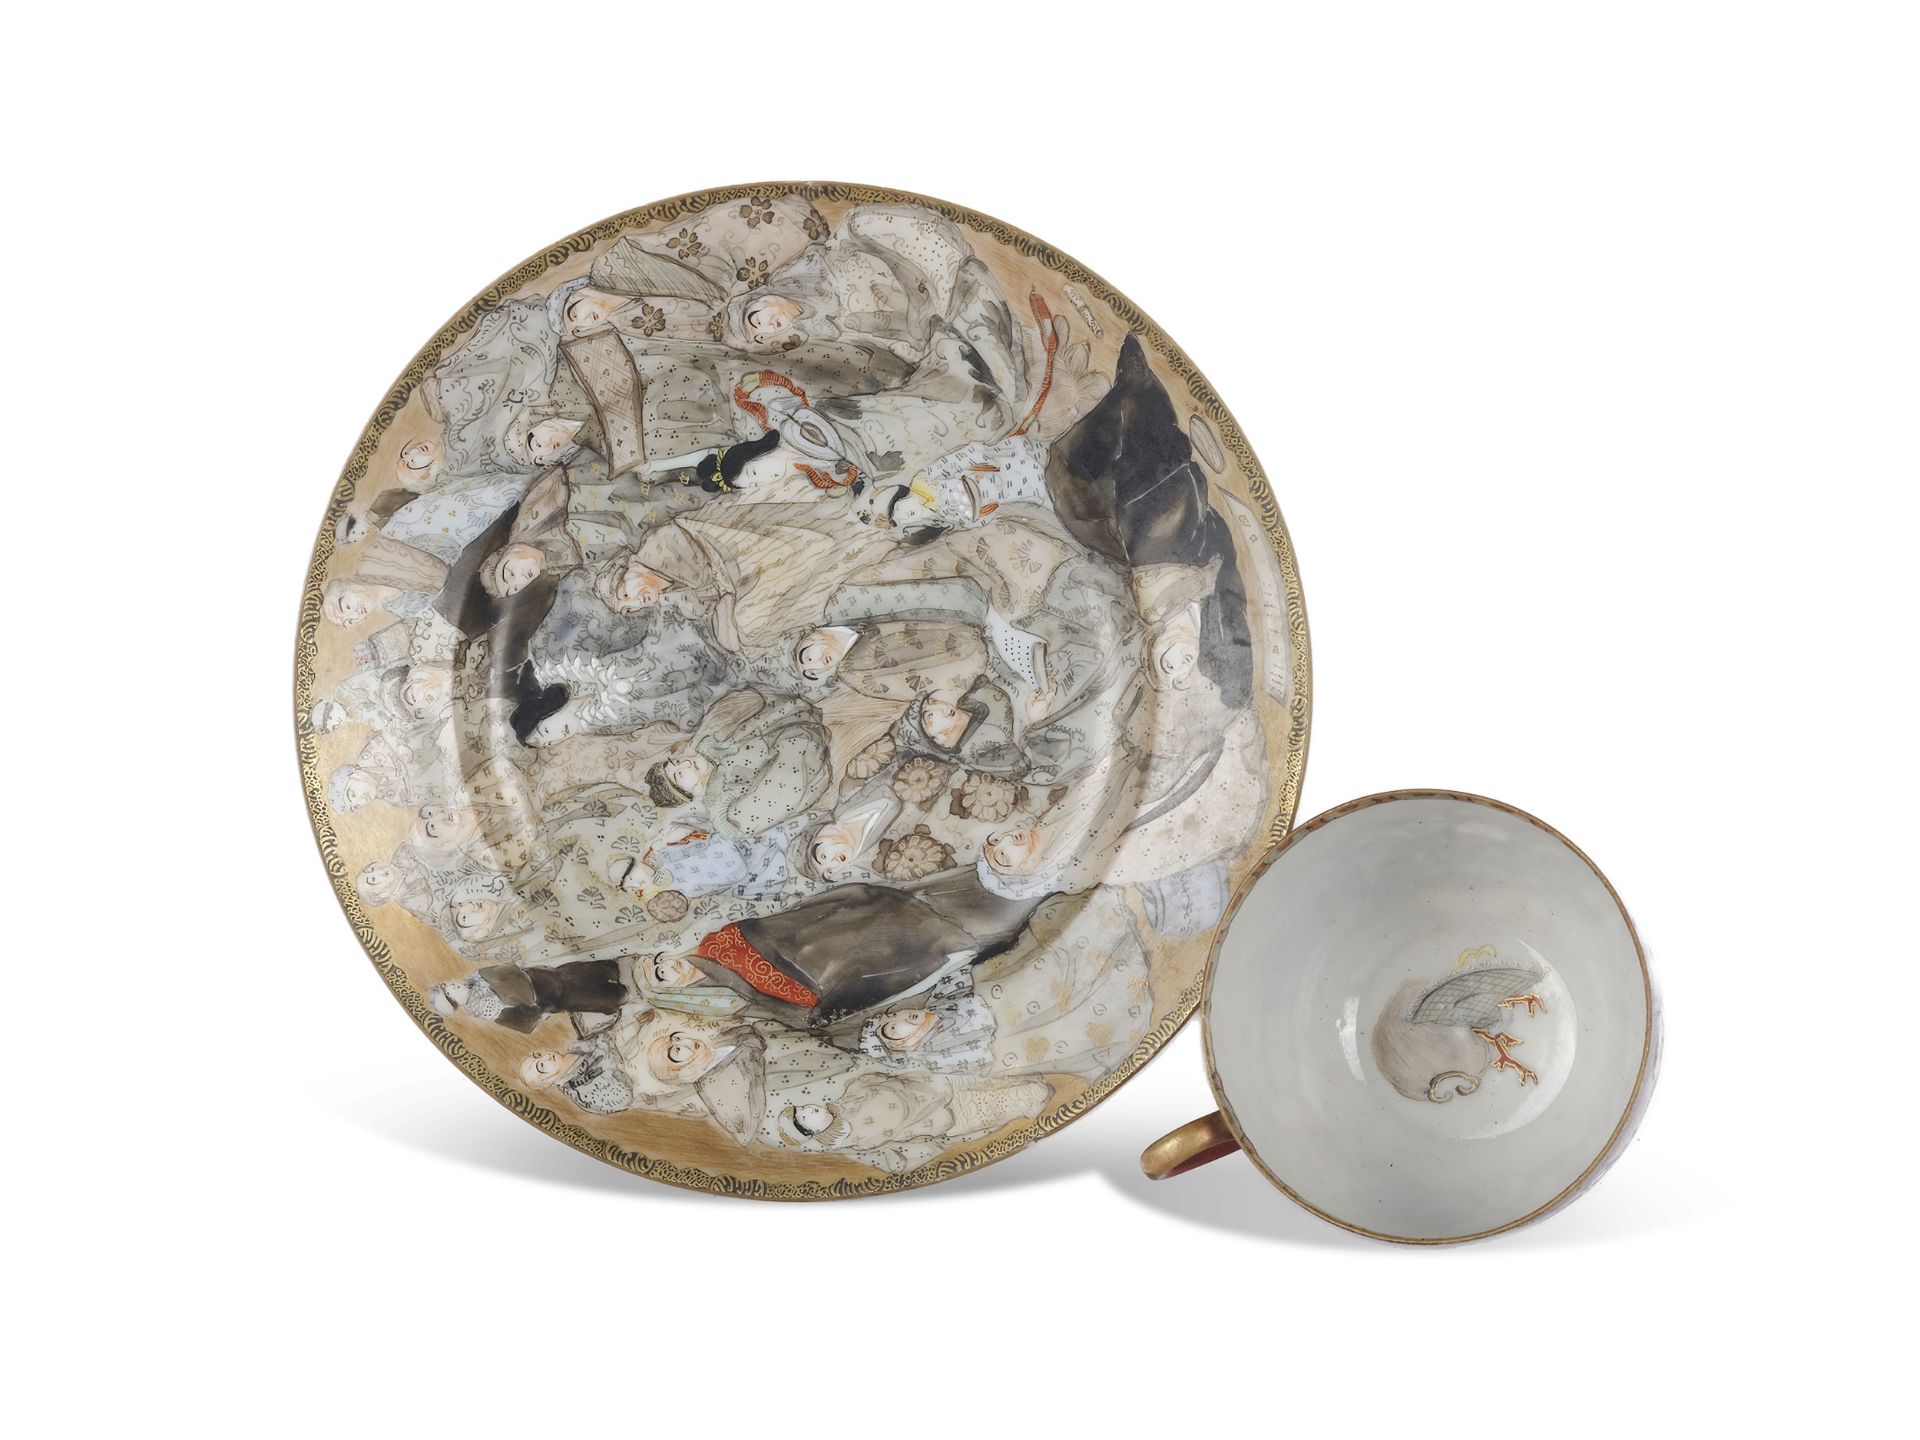 Cup with saucer, Japan, Meiji period, 1868-1912 - Image 2 of 3